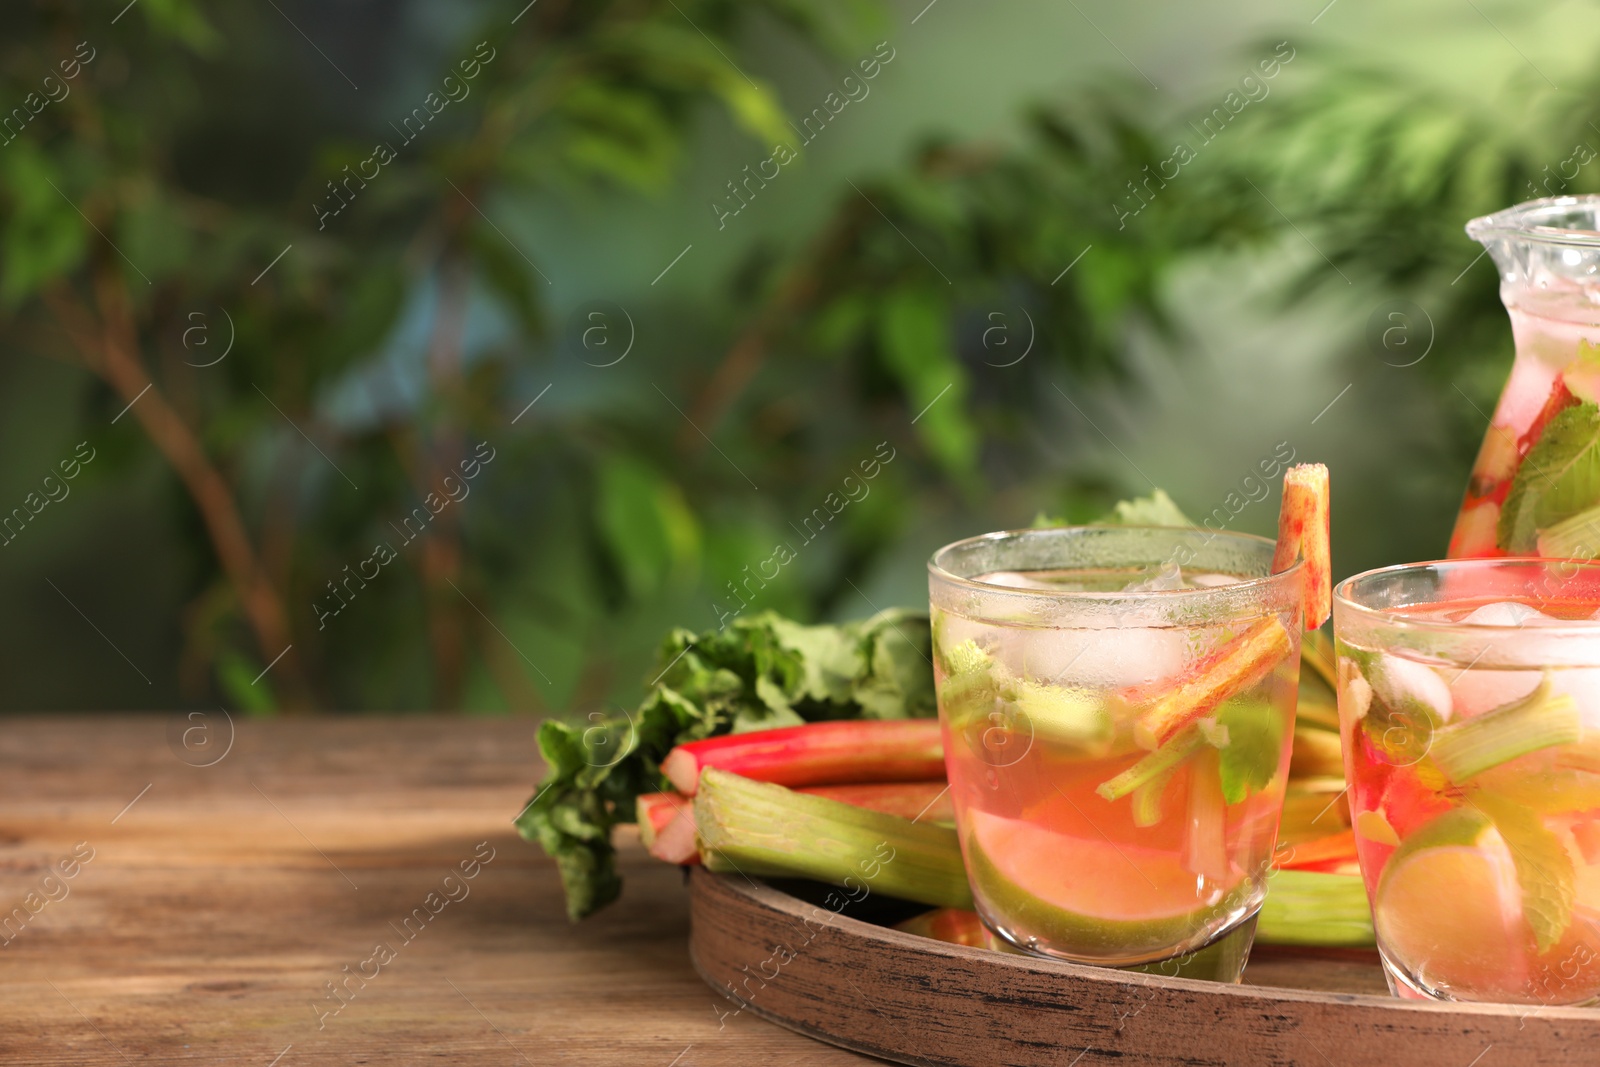 Photo of Glasses and jug of tasty rhubarb cocktail with citrus fruits on wooden table outdoors, space for text